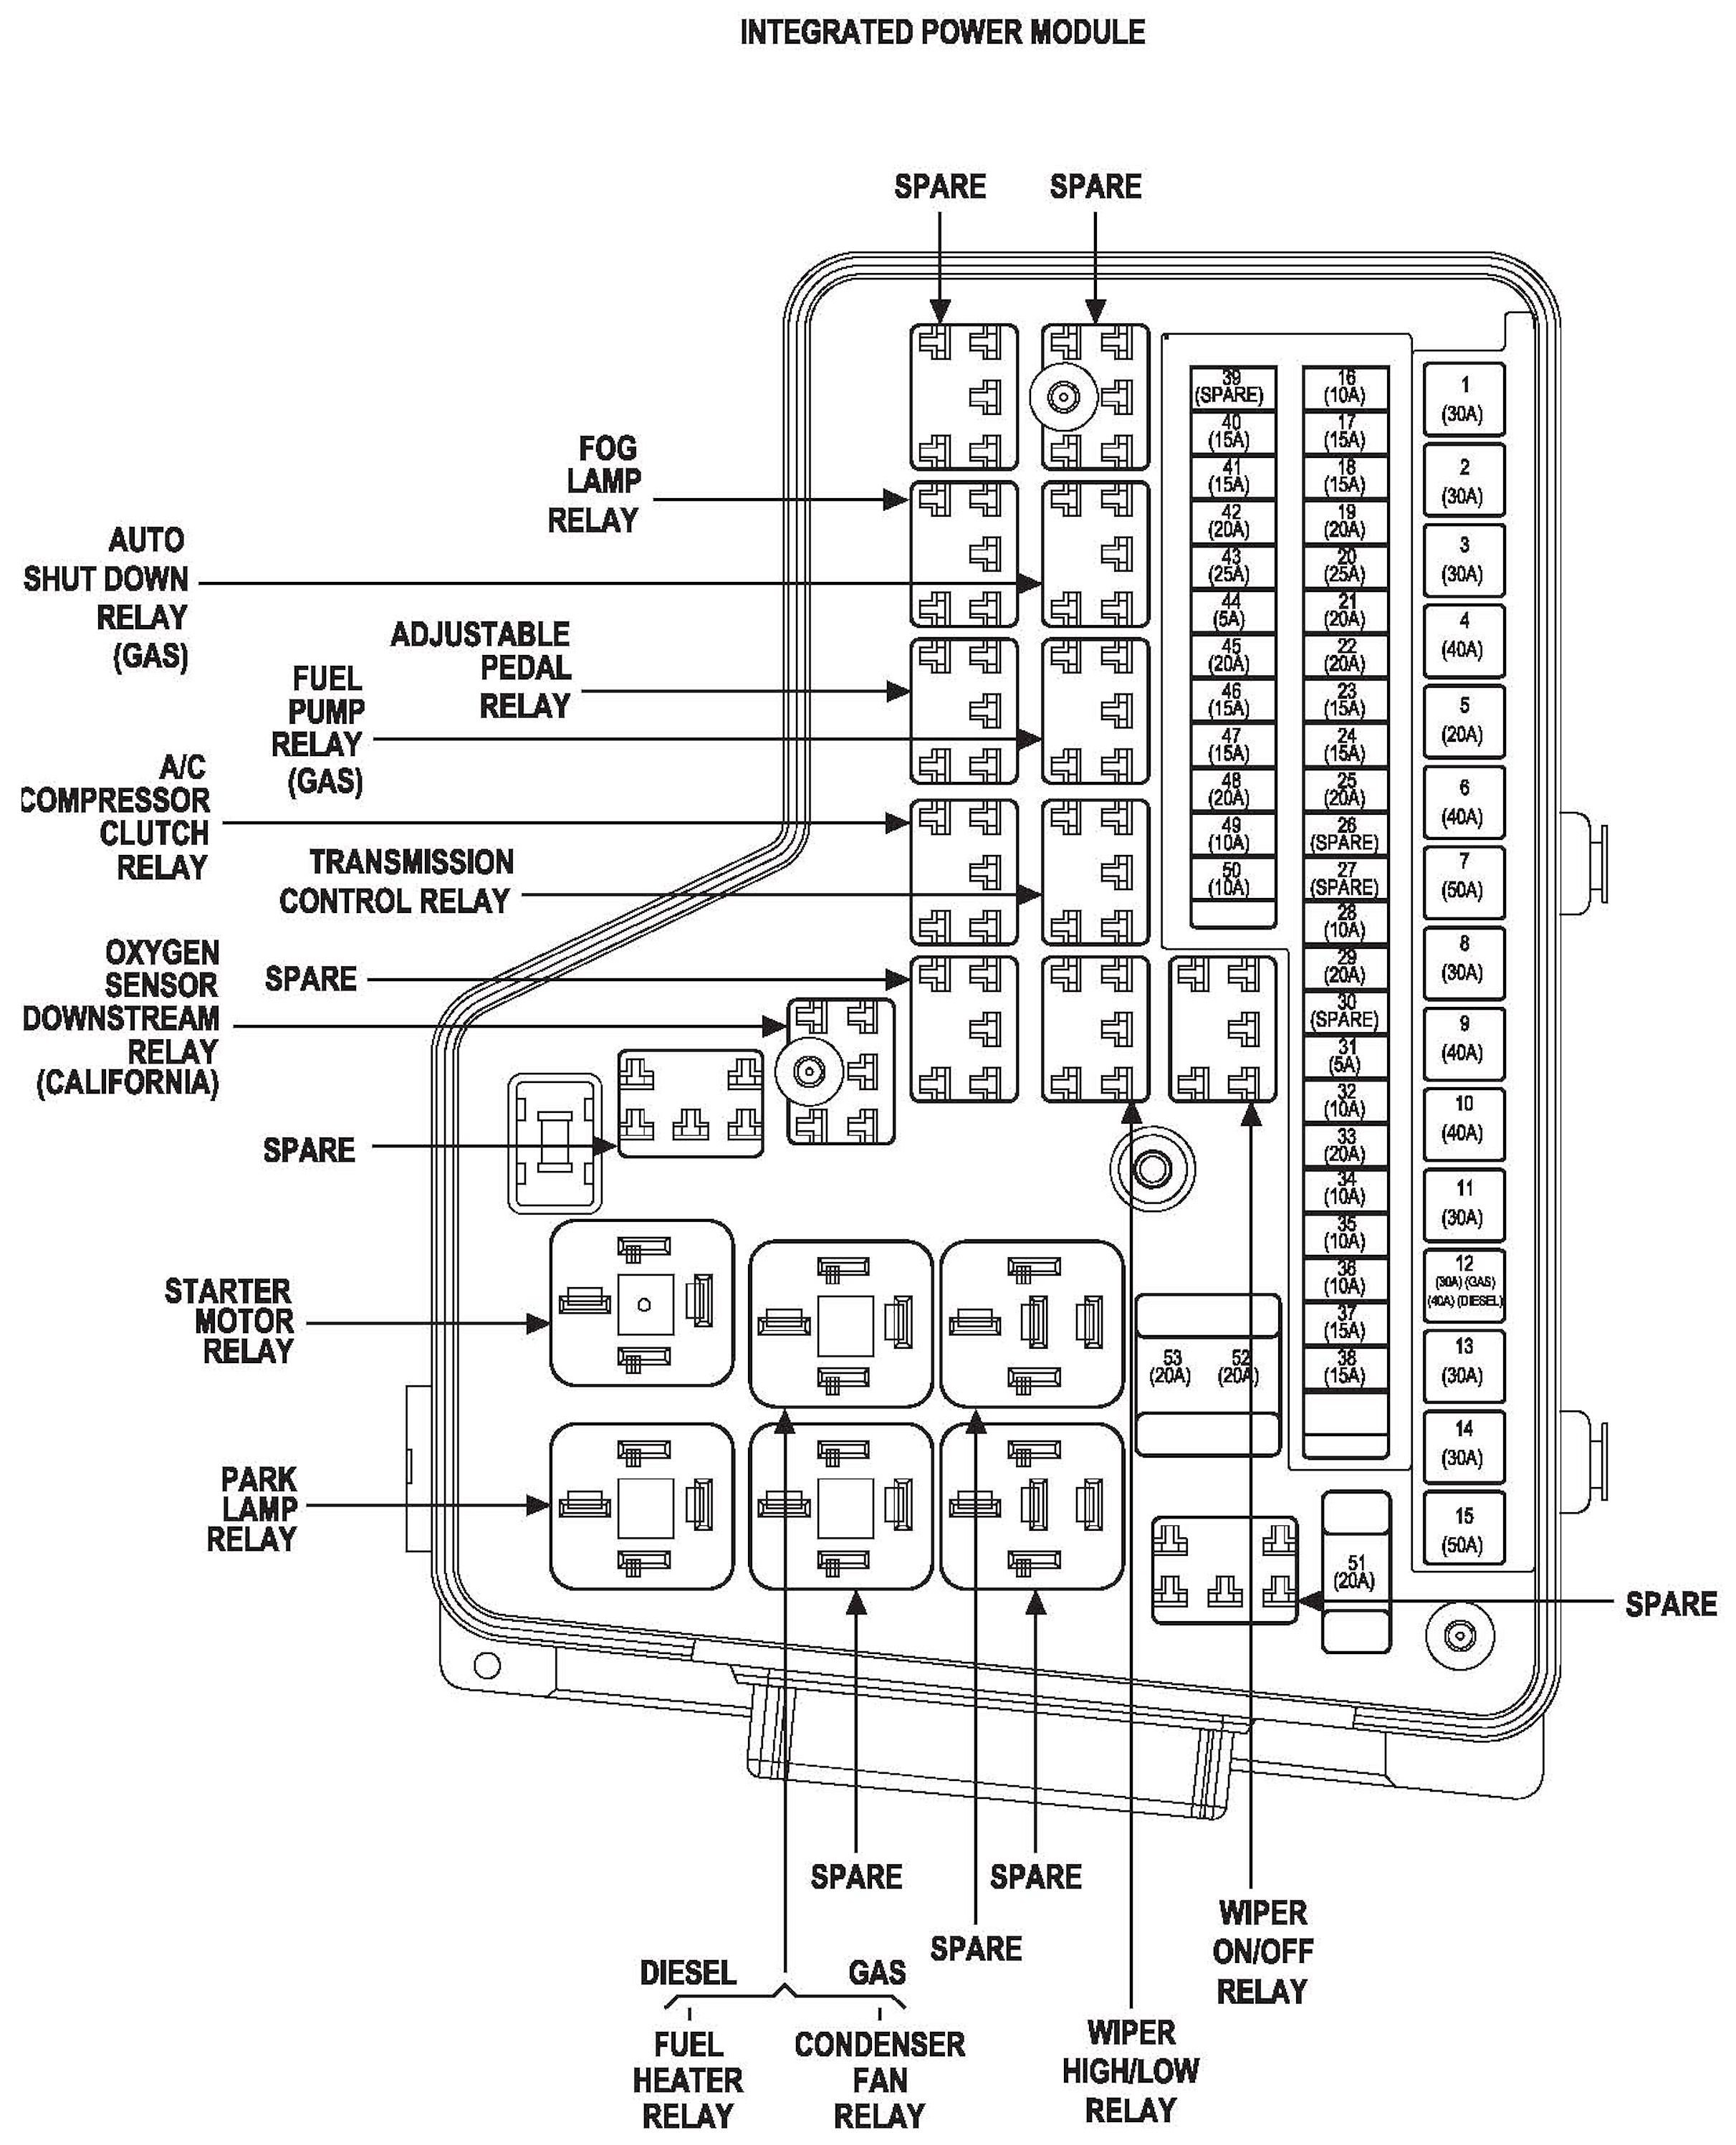 Wiring Diagram For Dodge Ram 1500 from 2020cadillac.com